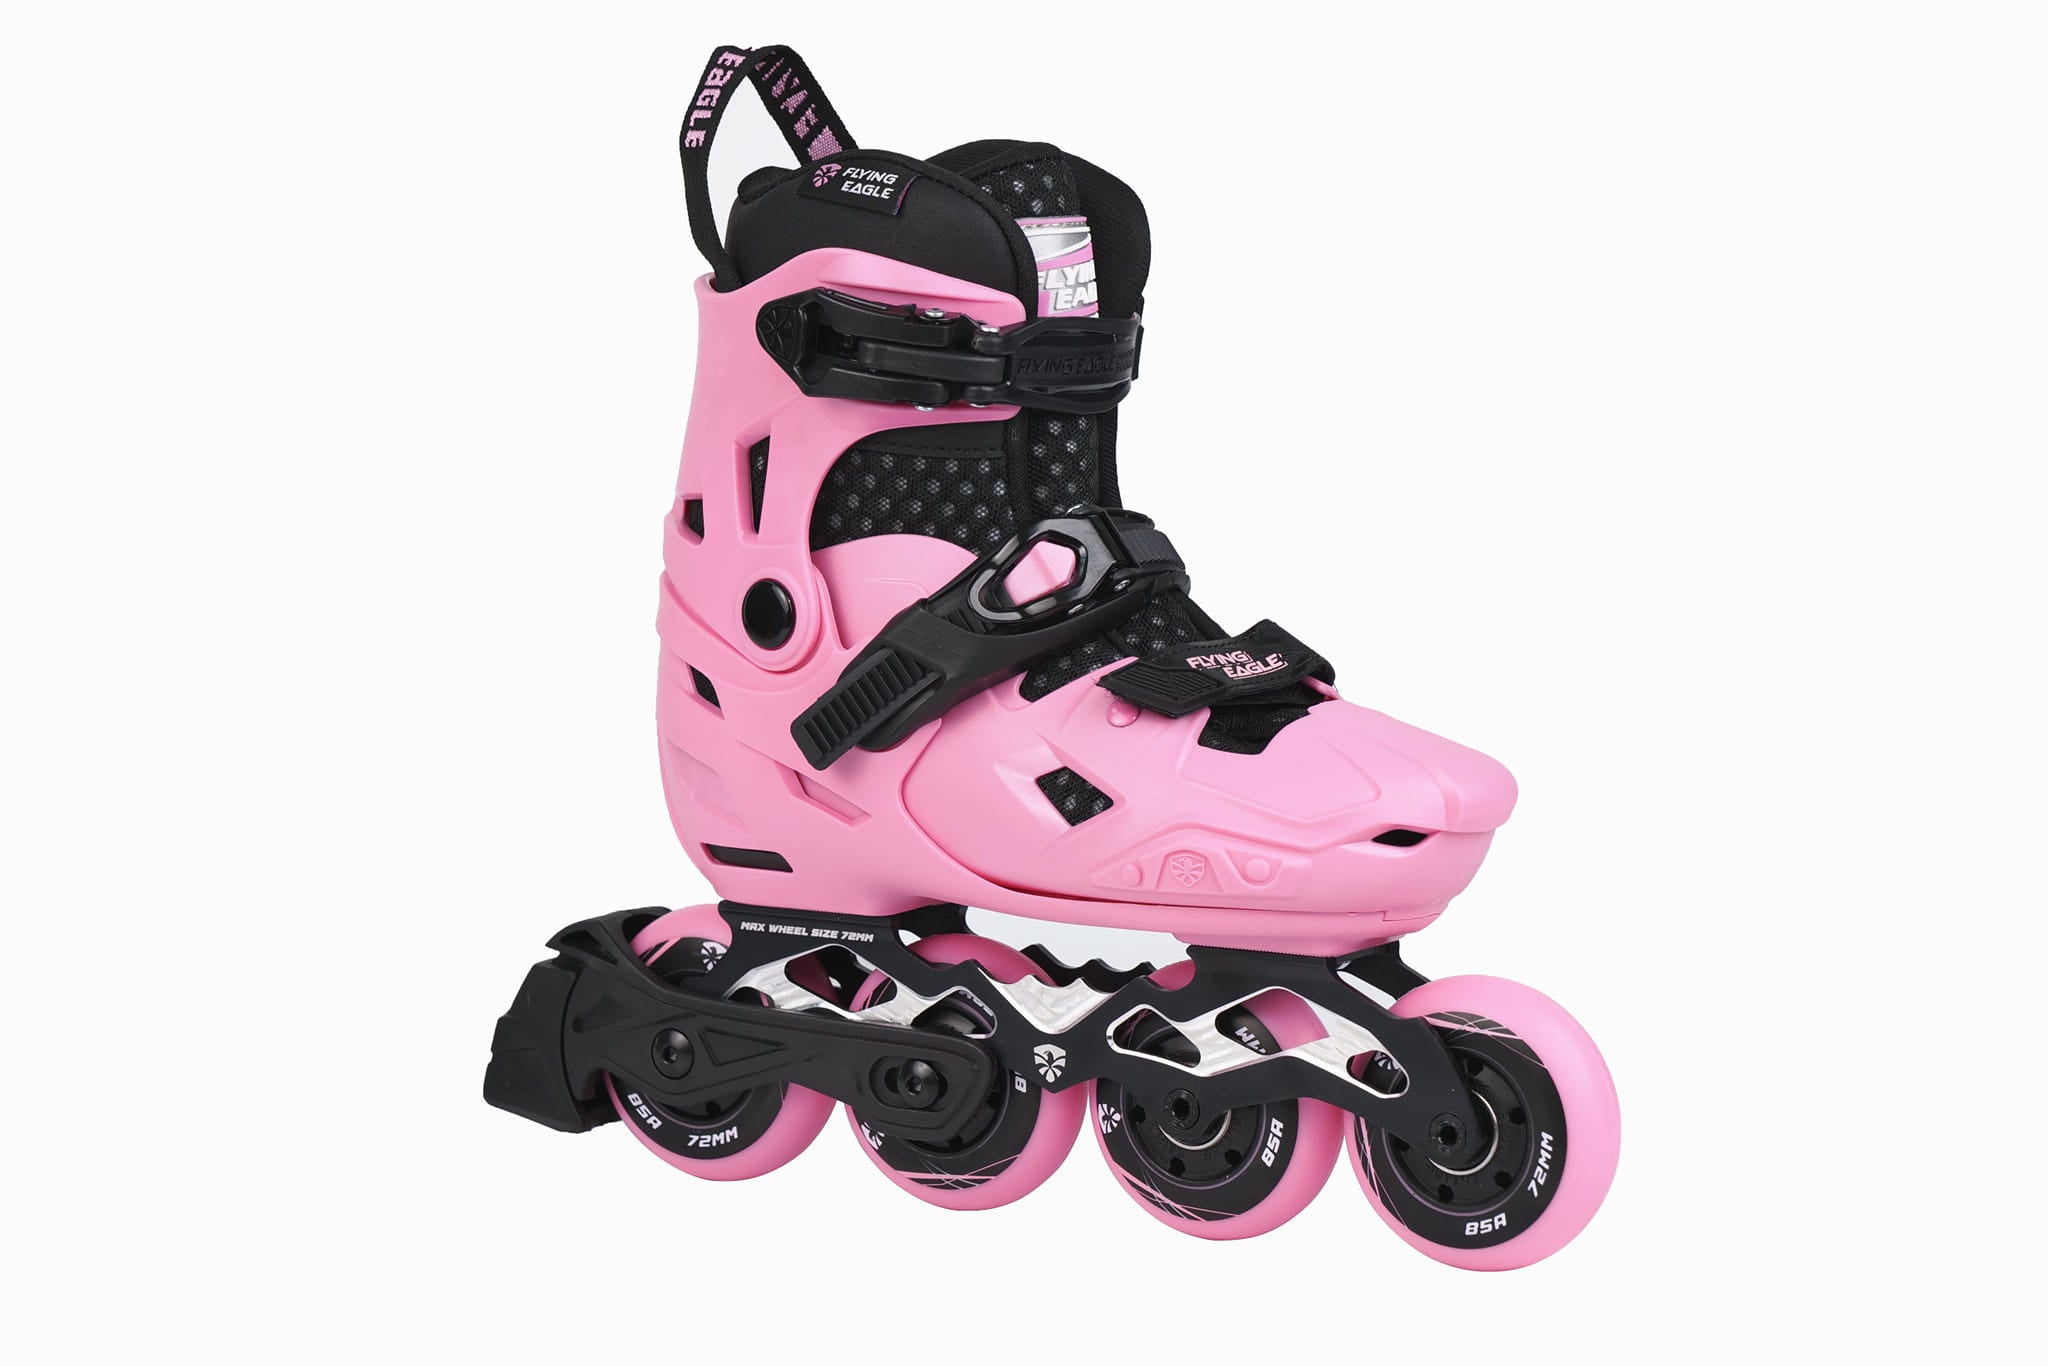 Patines Flying Eagle S7 Sprout patines niños